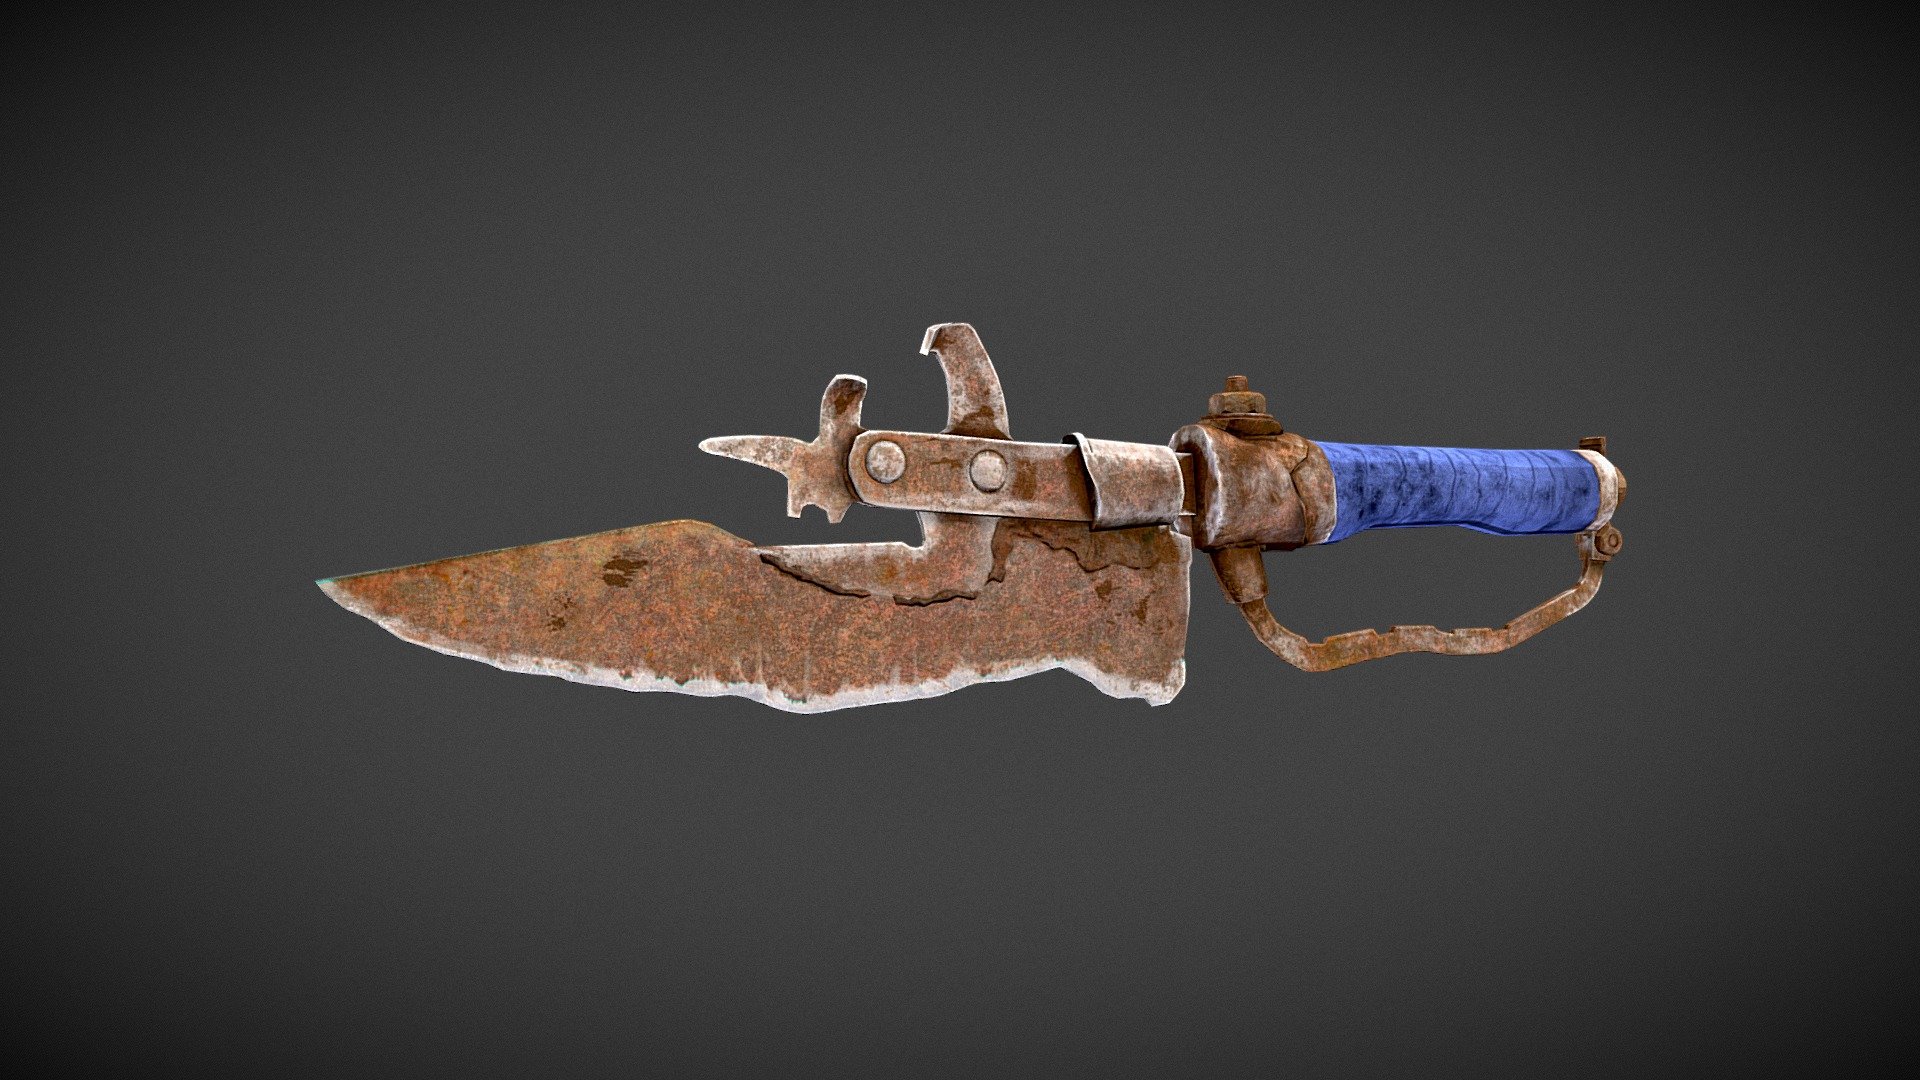 Post apocalyptic scrap knife modeled based on concept art of Anton Kukhtytskyi (with some small modification from my side): https://www.artstation.com/artwork/znq2m

Modeled in Blender and textured in Substance Painter 3d model